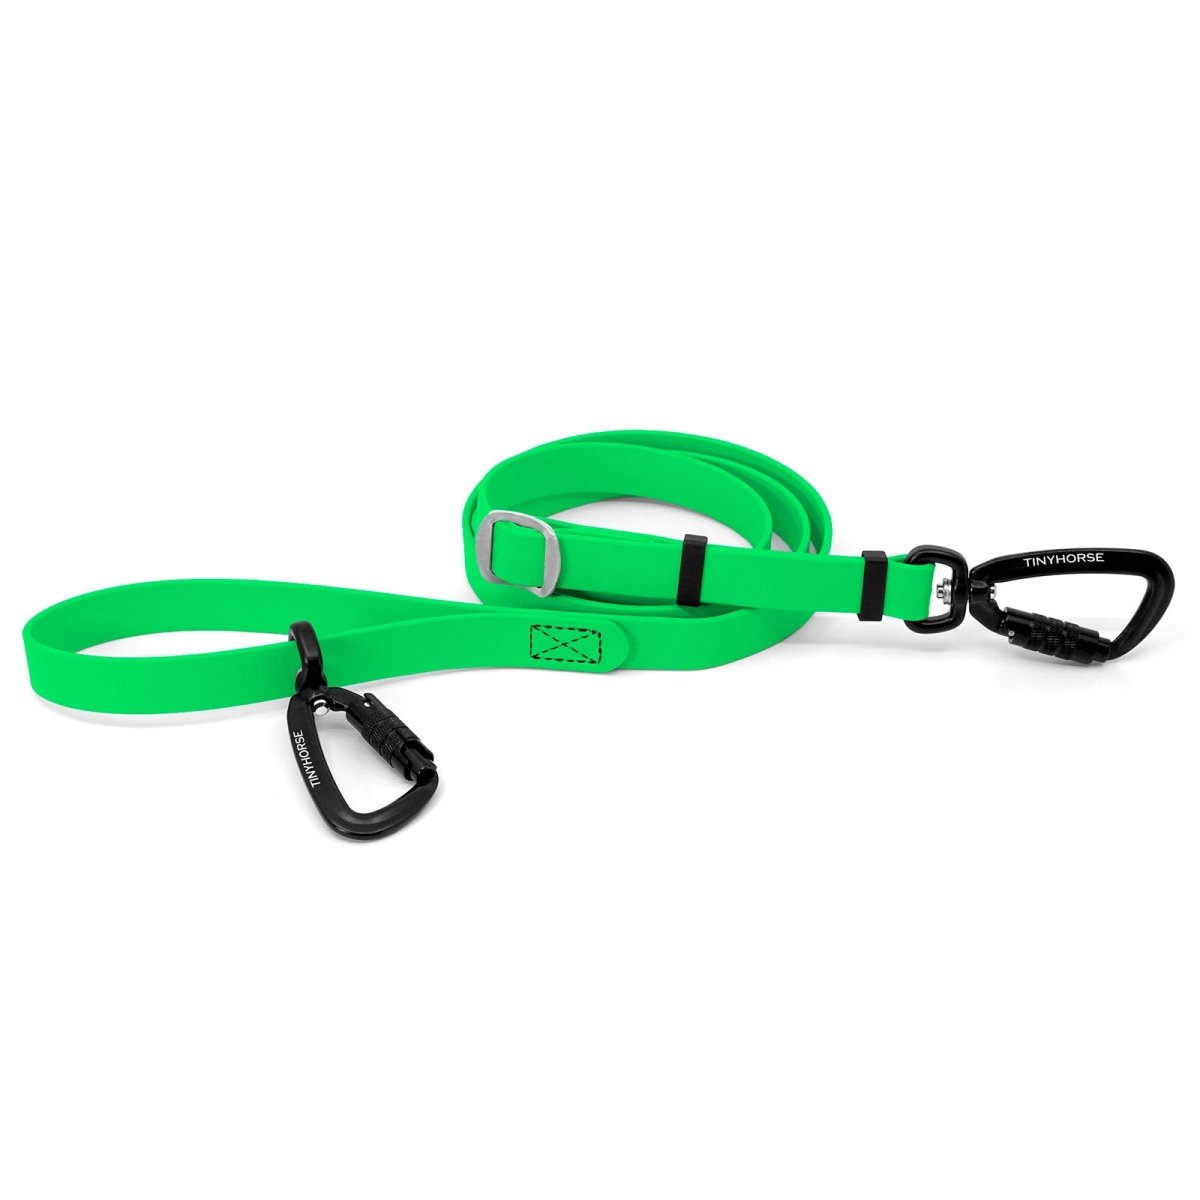 An adjustable neon green-coloured Lead-All Pro Extra made of BioThane with 2 auto-locking carabiners